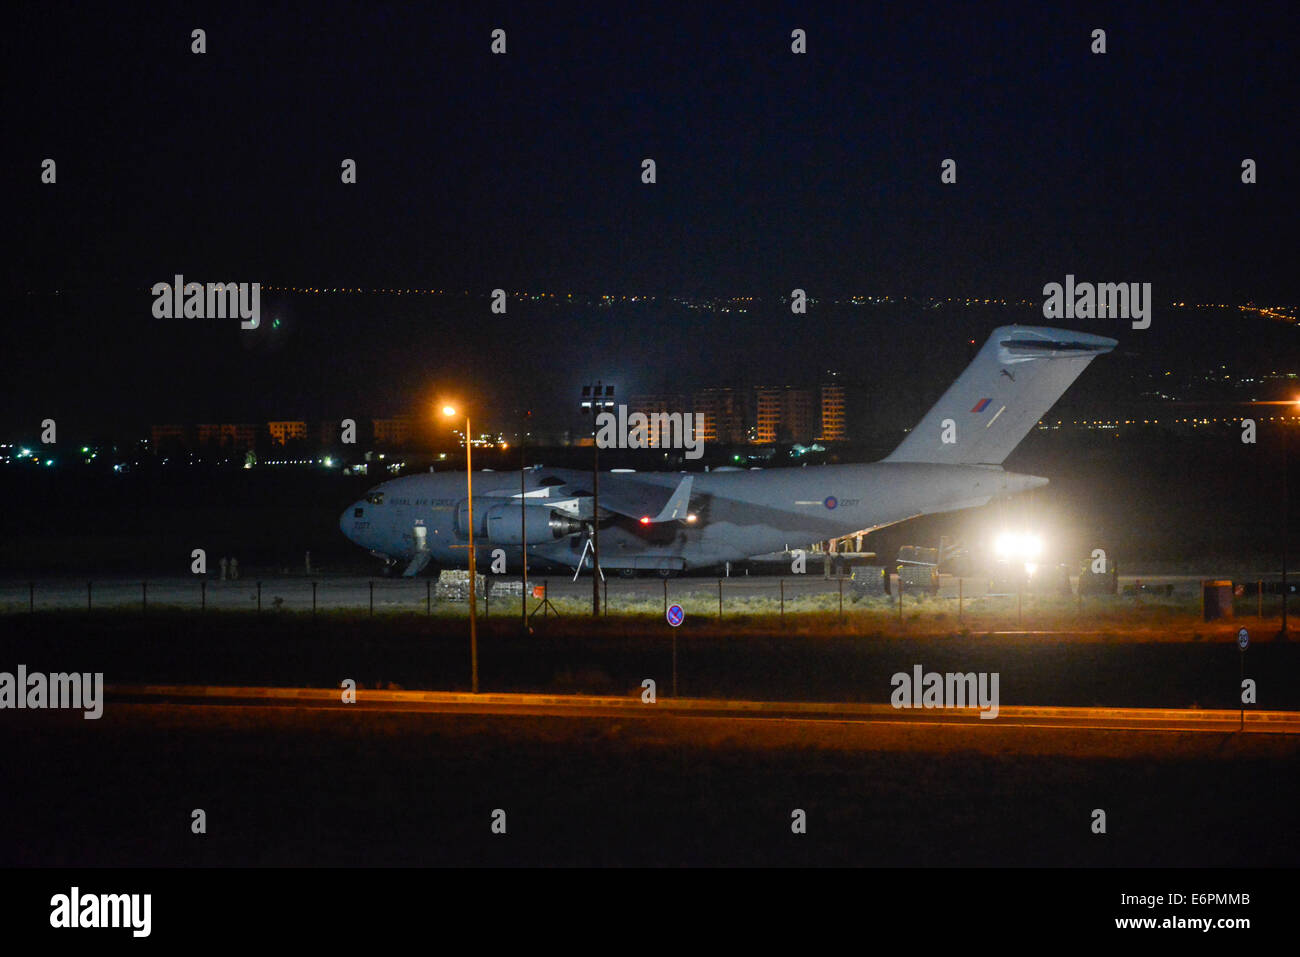 An RAF military airplane unloads equipment at 11pm local time on Thursday  28th August 2014 at Erbil International Airport, Kurdistan, Iraq. The cargo  is presumably aid. © Martin Alan Smith/Pacific Press/Alamy Live